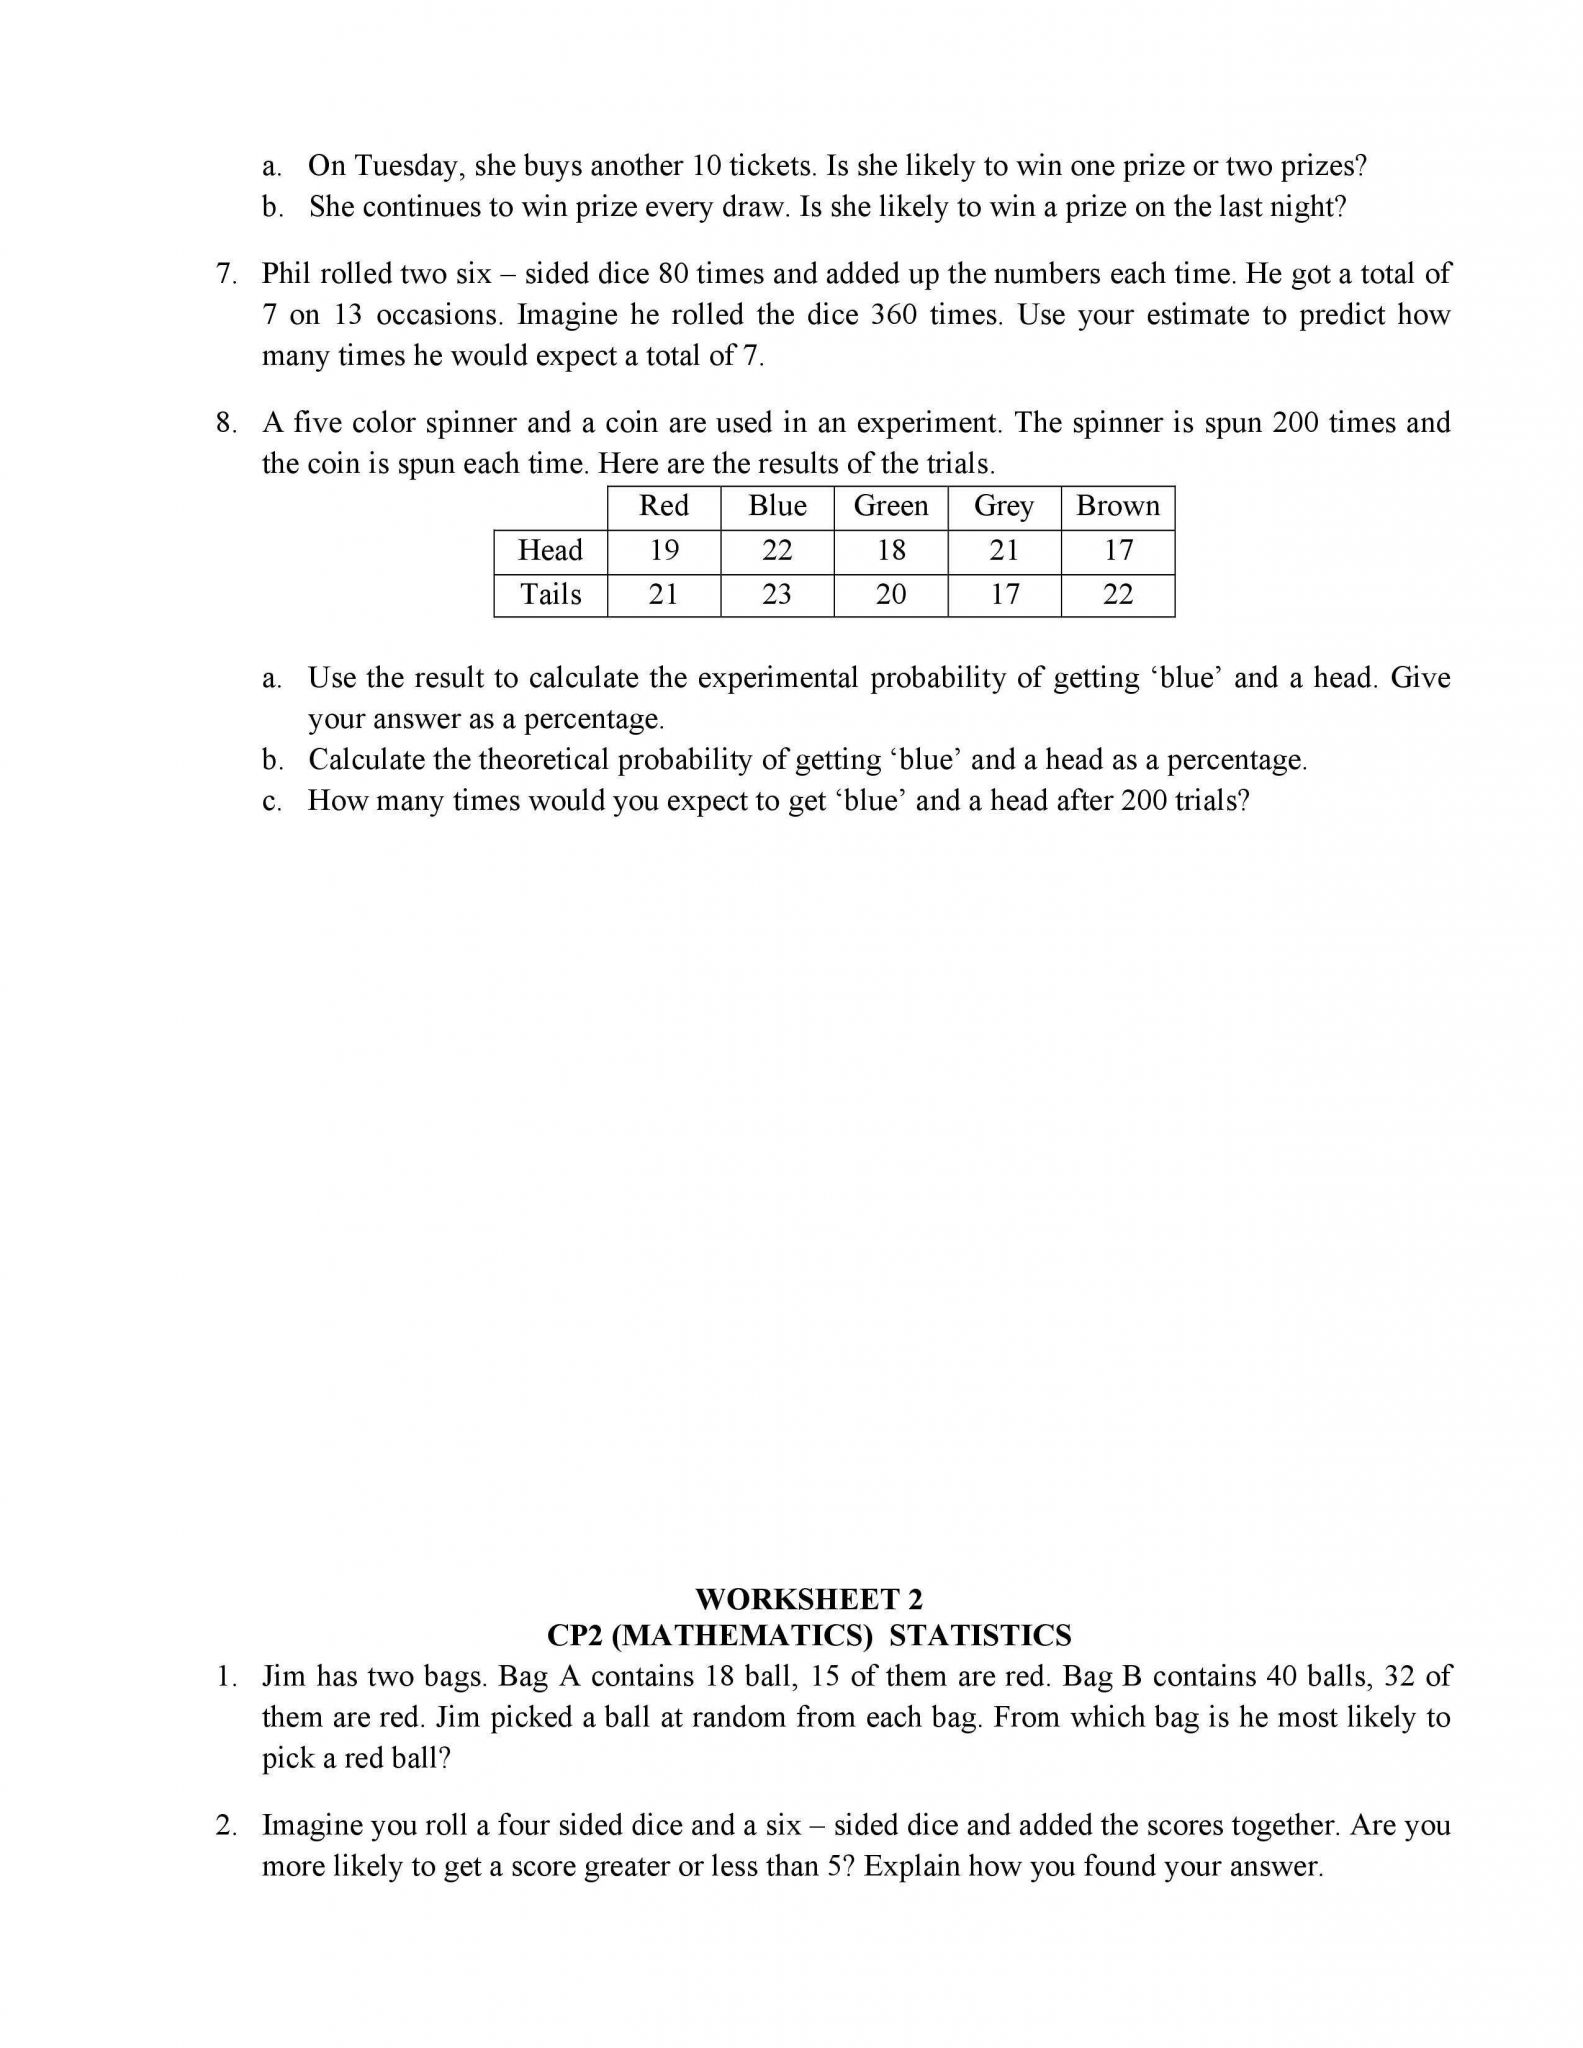 Simple and Compound Interest Worksheet Answers Along with Mathematics Class 8 Cie Cambridge International Education Notes